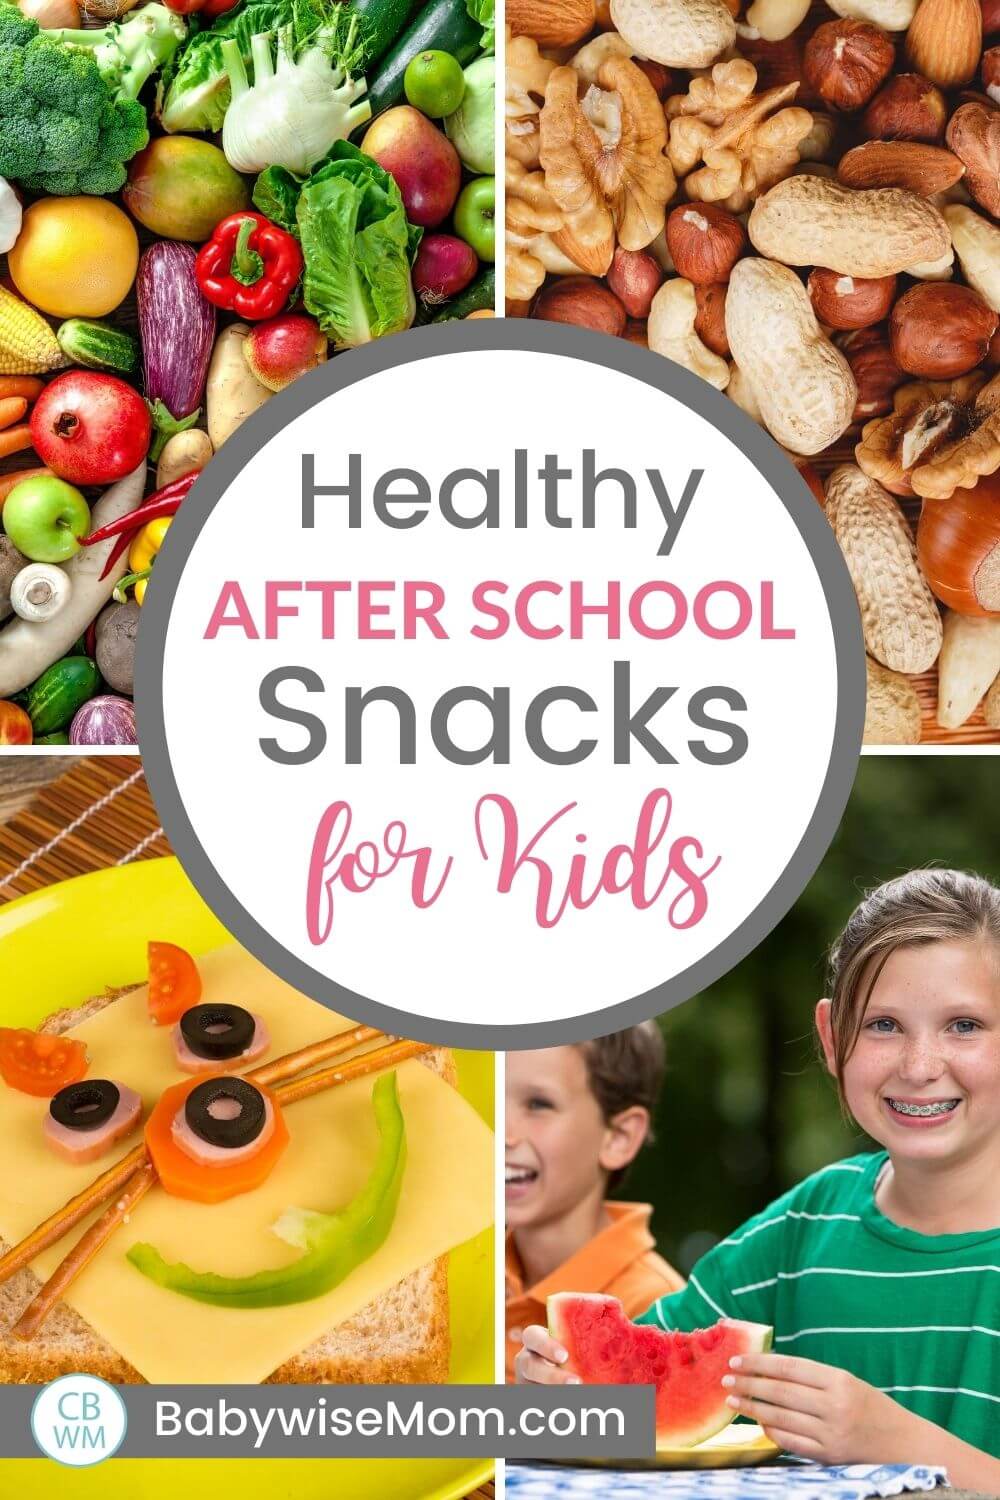 18 Healthy Snacks for After School for Your Kids - Babywise Mom